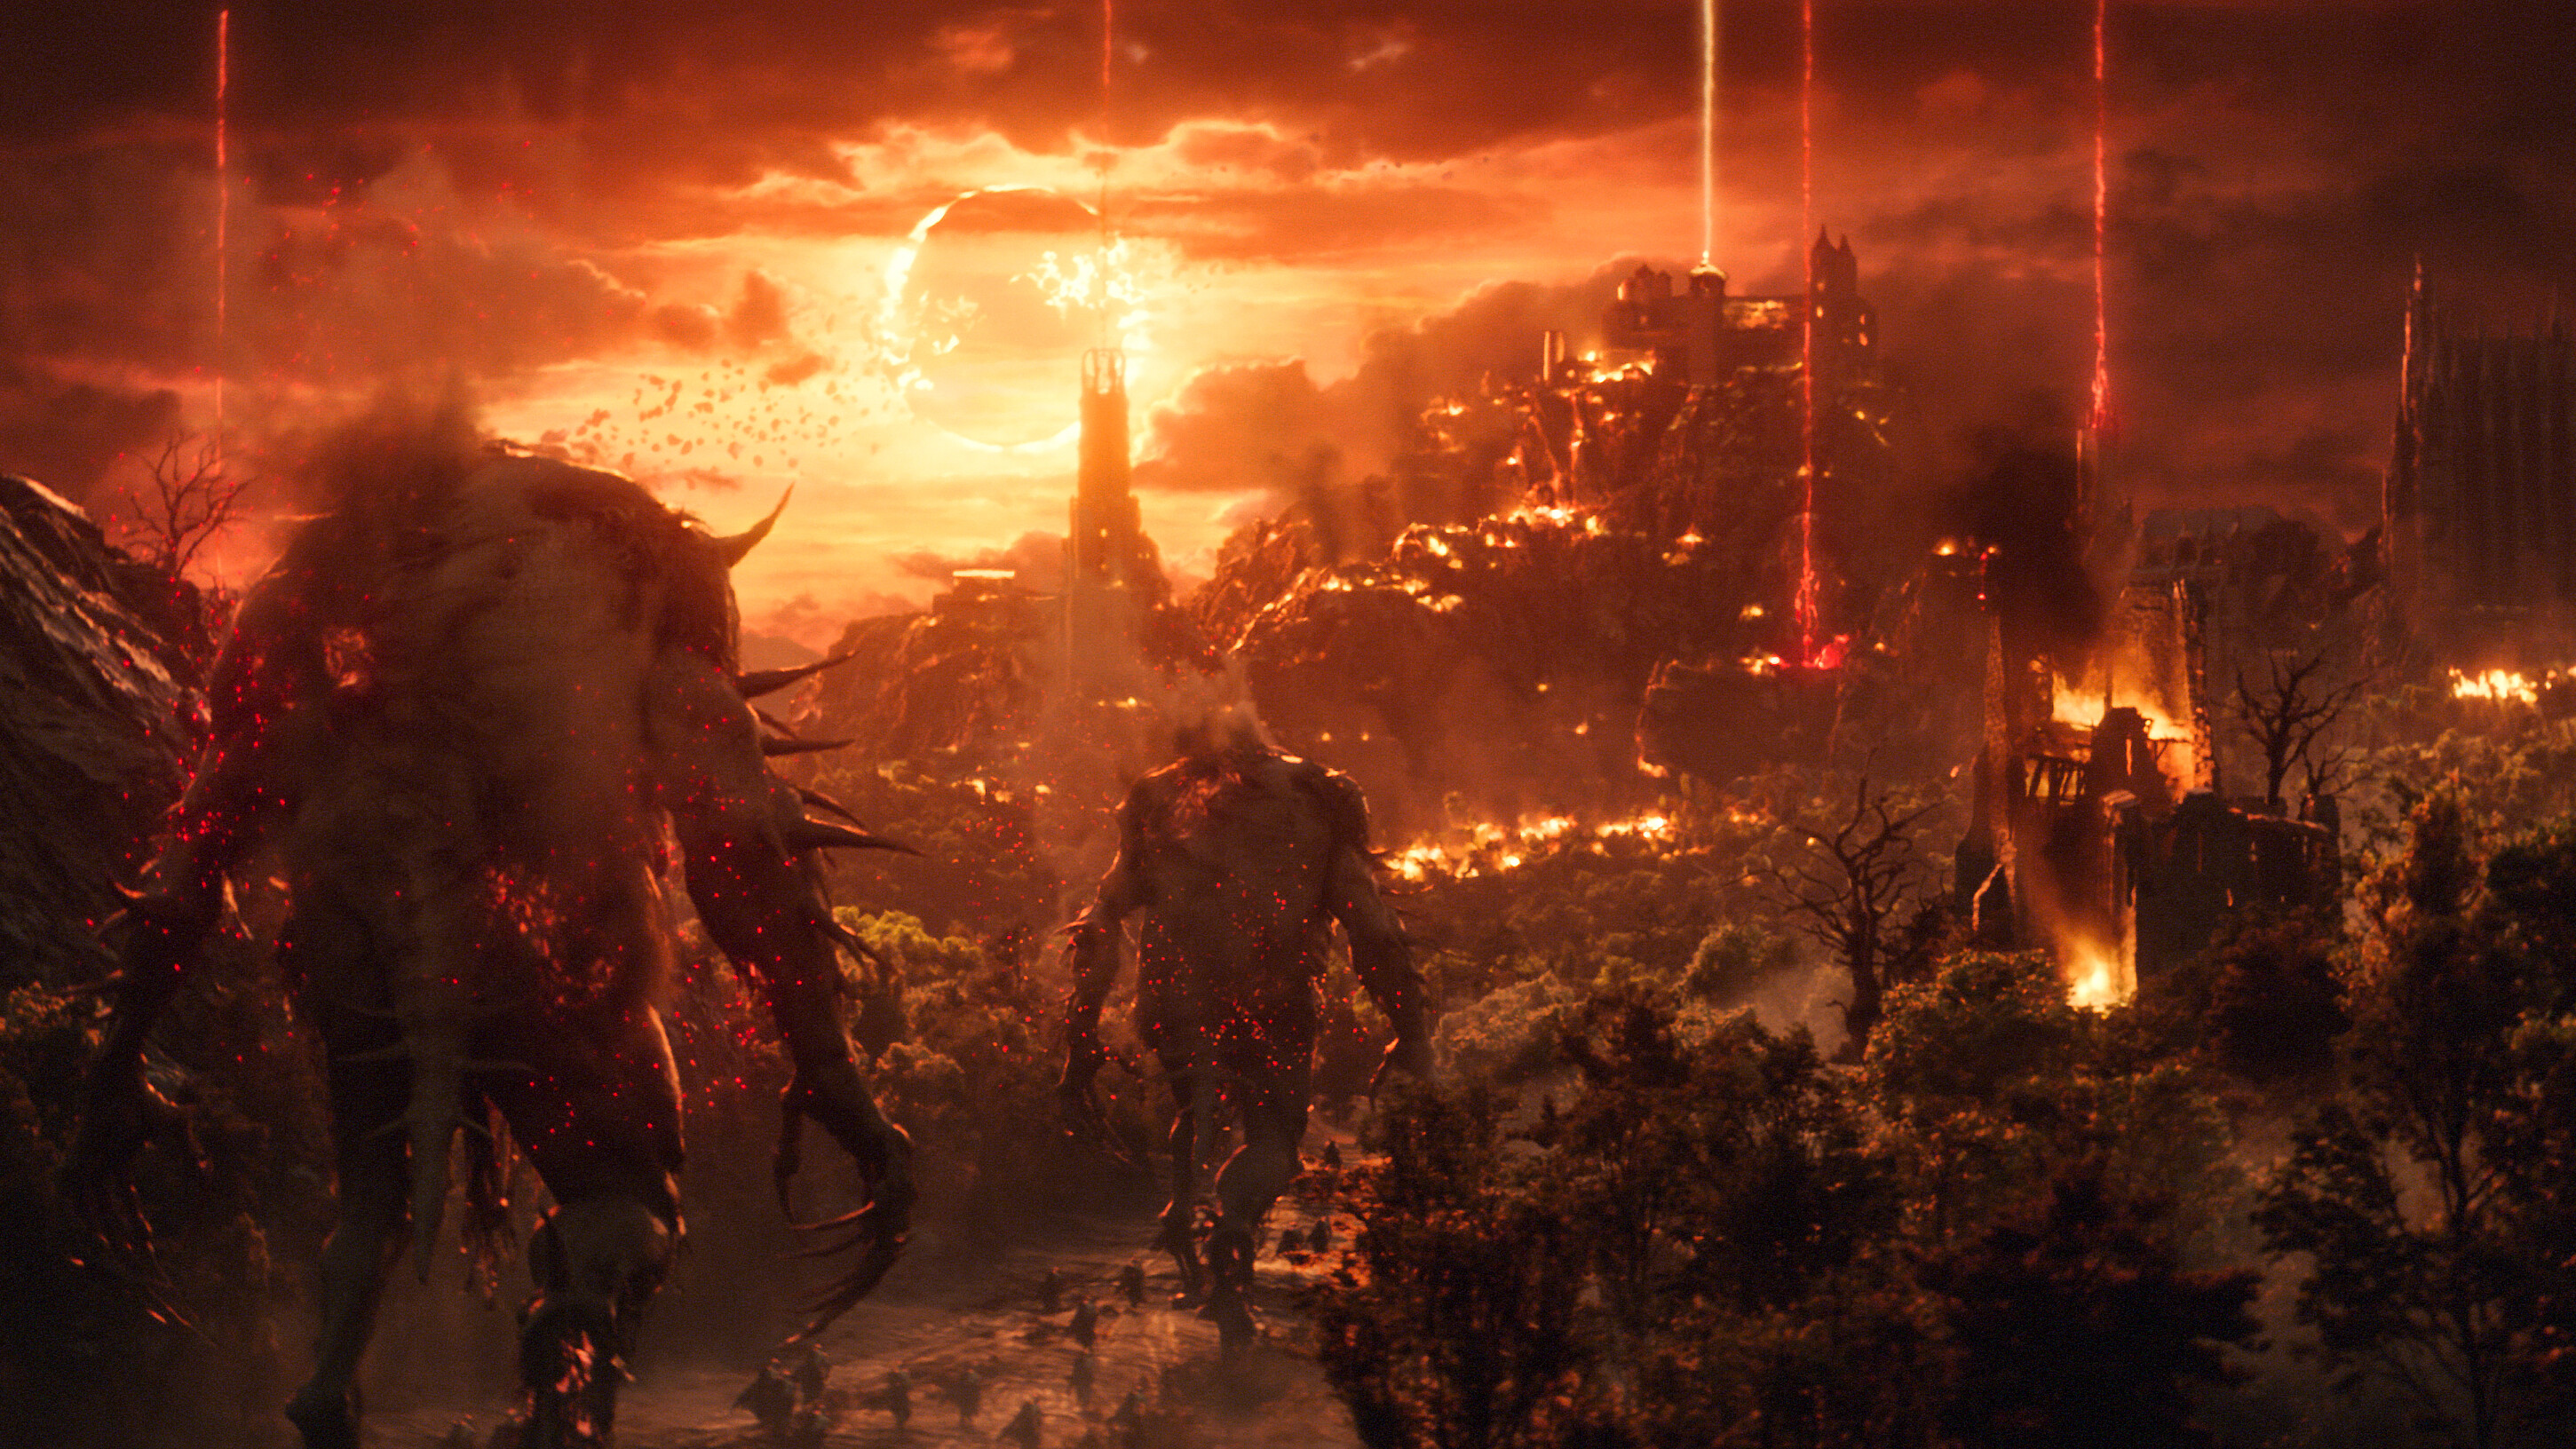 How Lords of the Fallen harnesses immersive PS5 features, out Oct